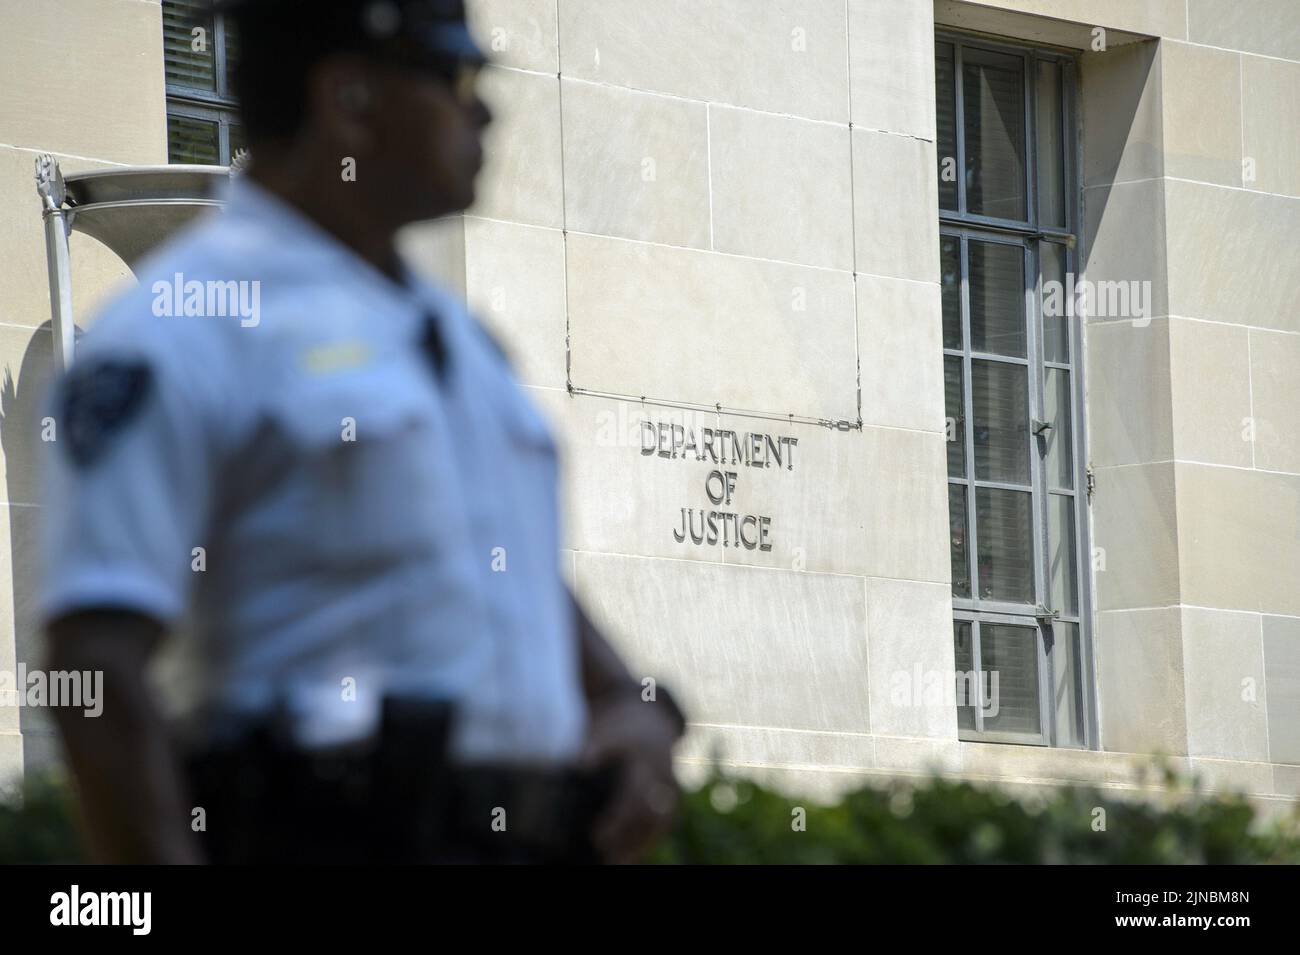 Washington, United States. 10th Aug, 2022. The Justice Department building is shown in Washington, DC on Wednesday, August 10, 2022. The FBI executed a search warrant on August 9, 2022 of former President Donald Trump's Mar-a-Lago home in Palm Beach, Florida purportedly looking for classified documents that may have been taken from the White House when Trump left office in 2021. Photo by Bonnie Cash/UPI Credit: UPI/Alamy Live News Stock Photo